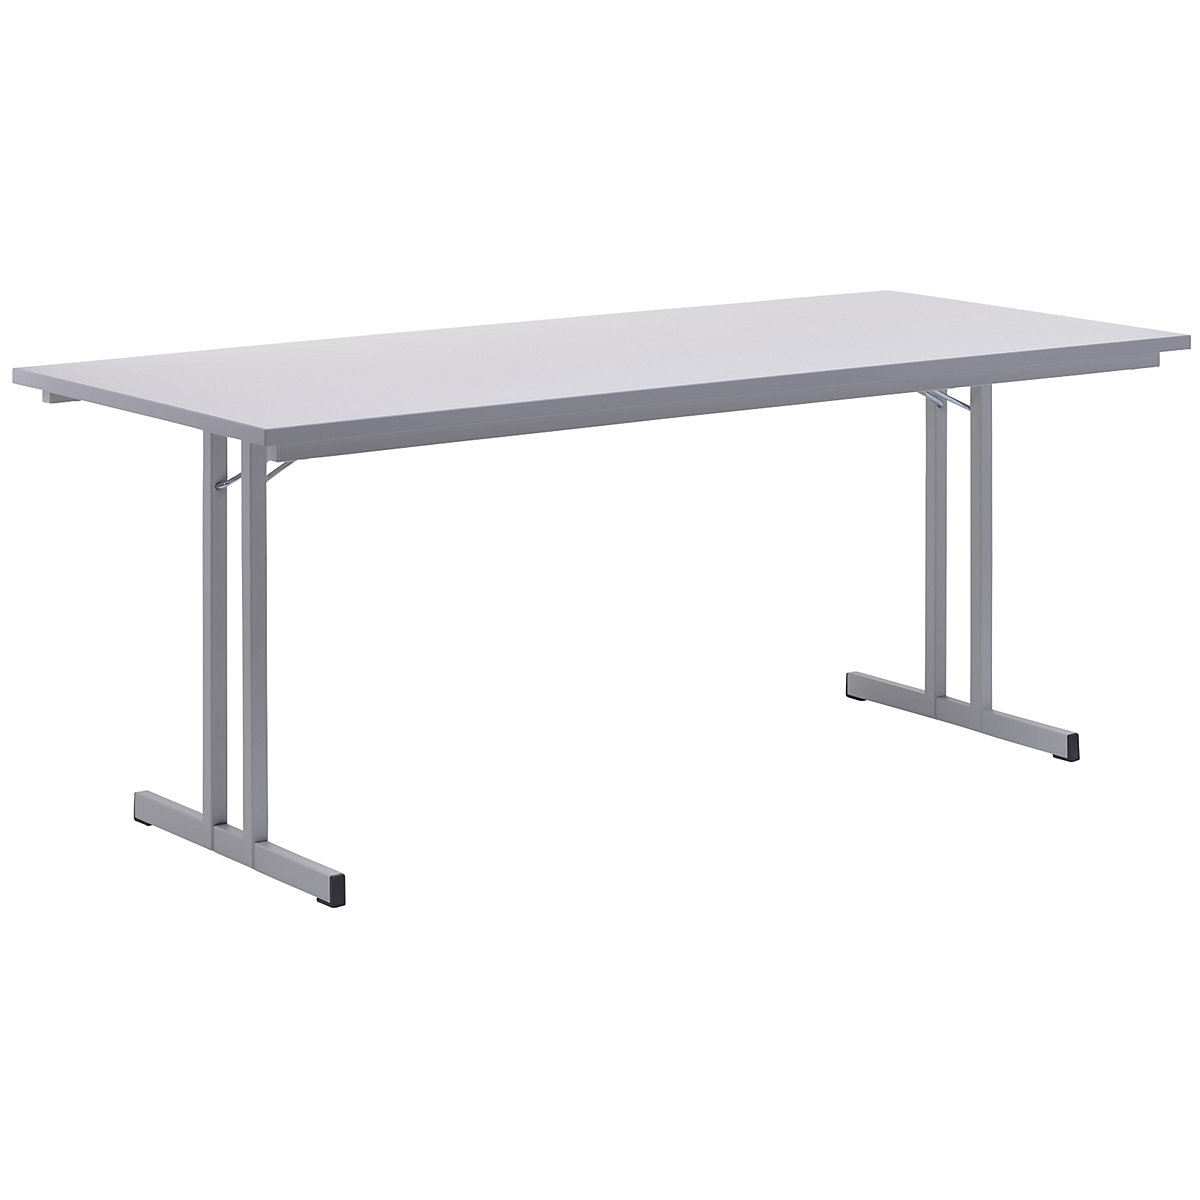 Folding table, with extra thick tabletop, height 720 mm, 1800 x 800 mm, light grey frame, light grey tabletop-4